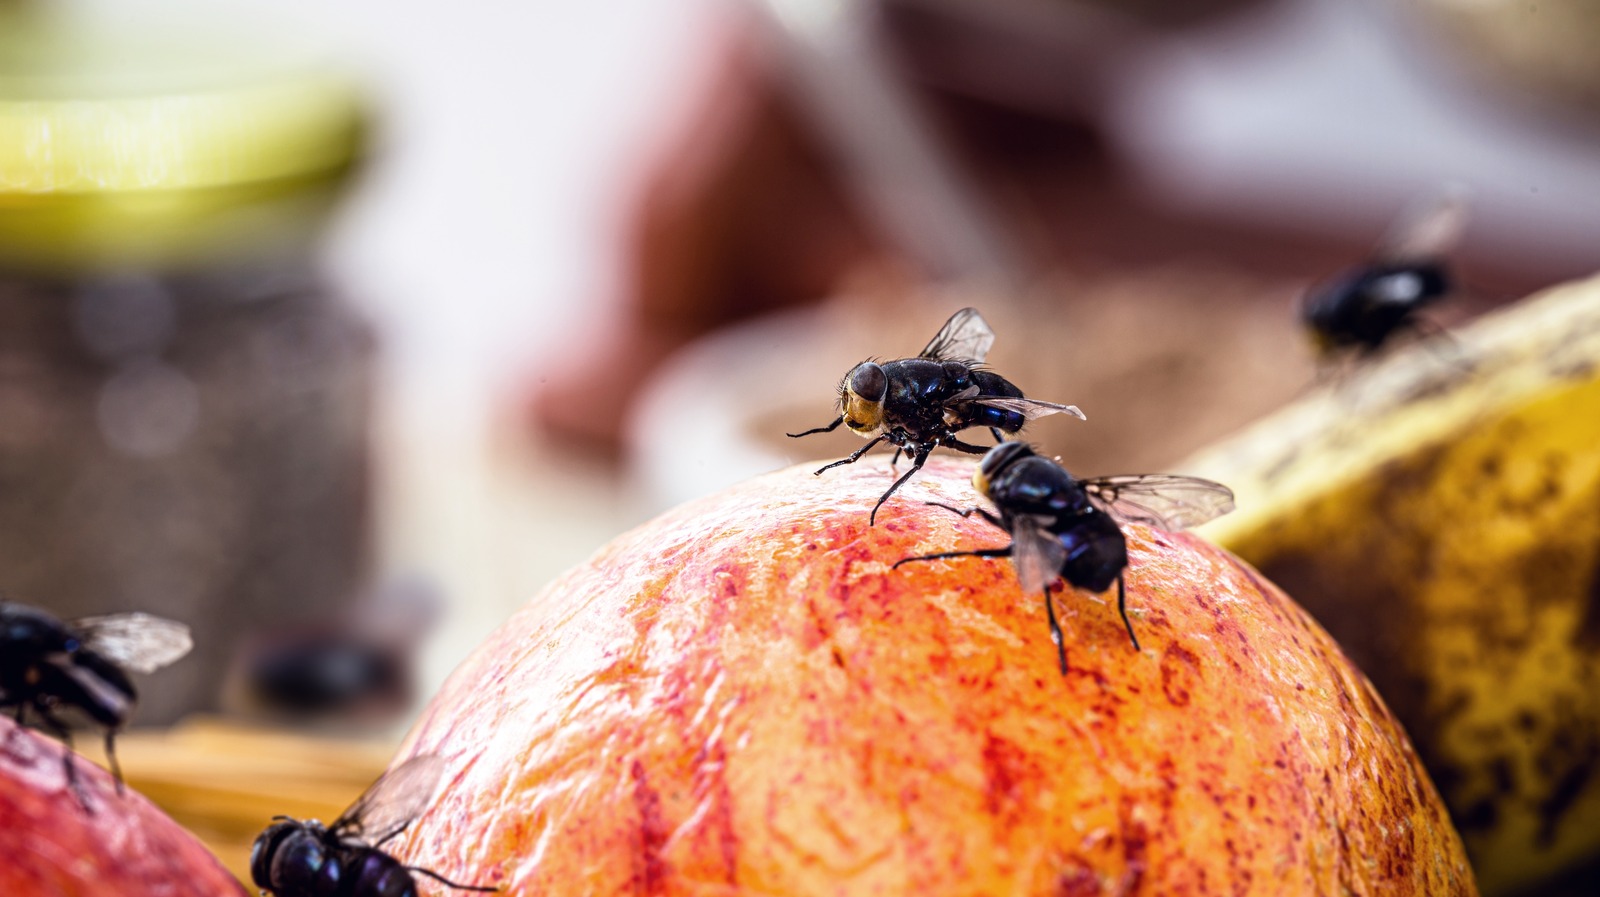 Where do fruit flies come from? They don't just 'magically appear.